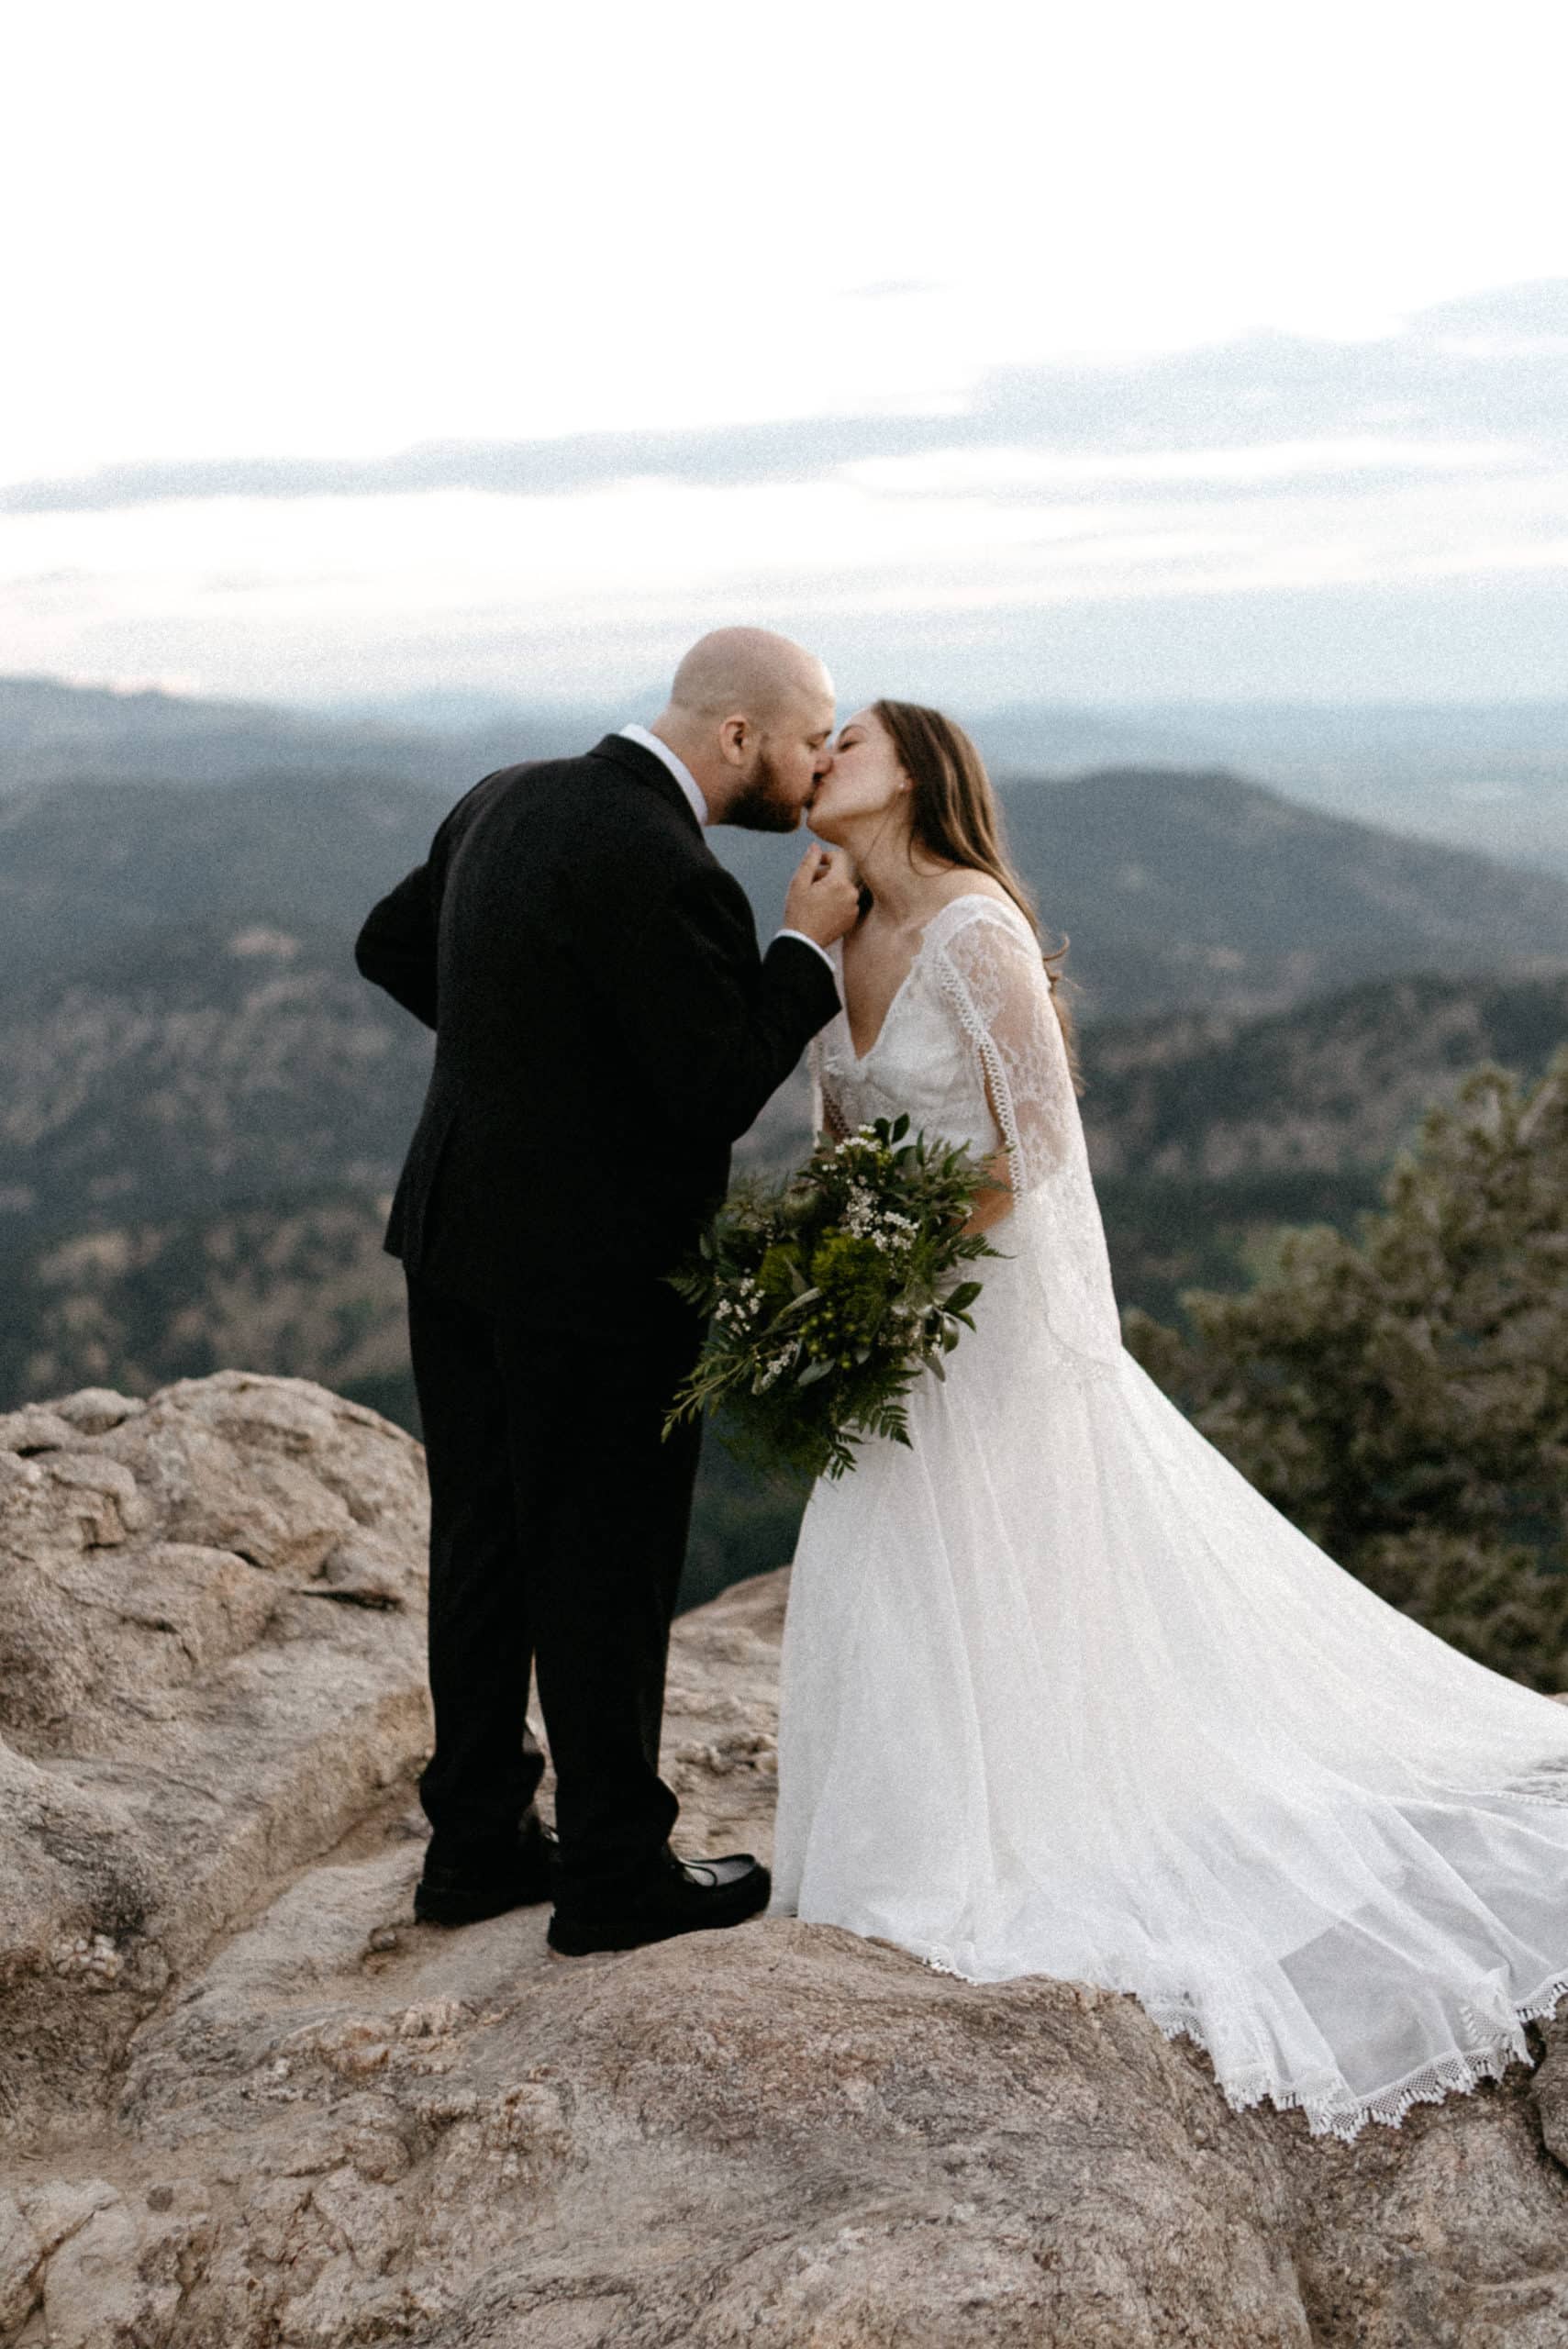 First kiss as husband and wife at lost gulch overlook wedding